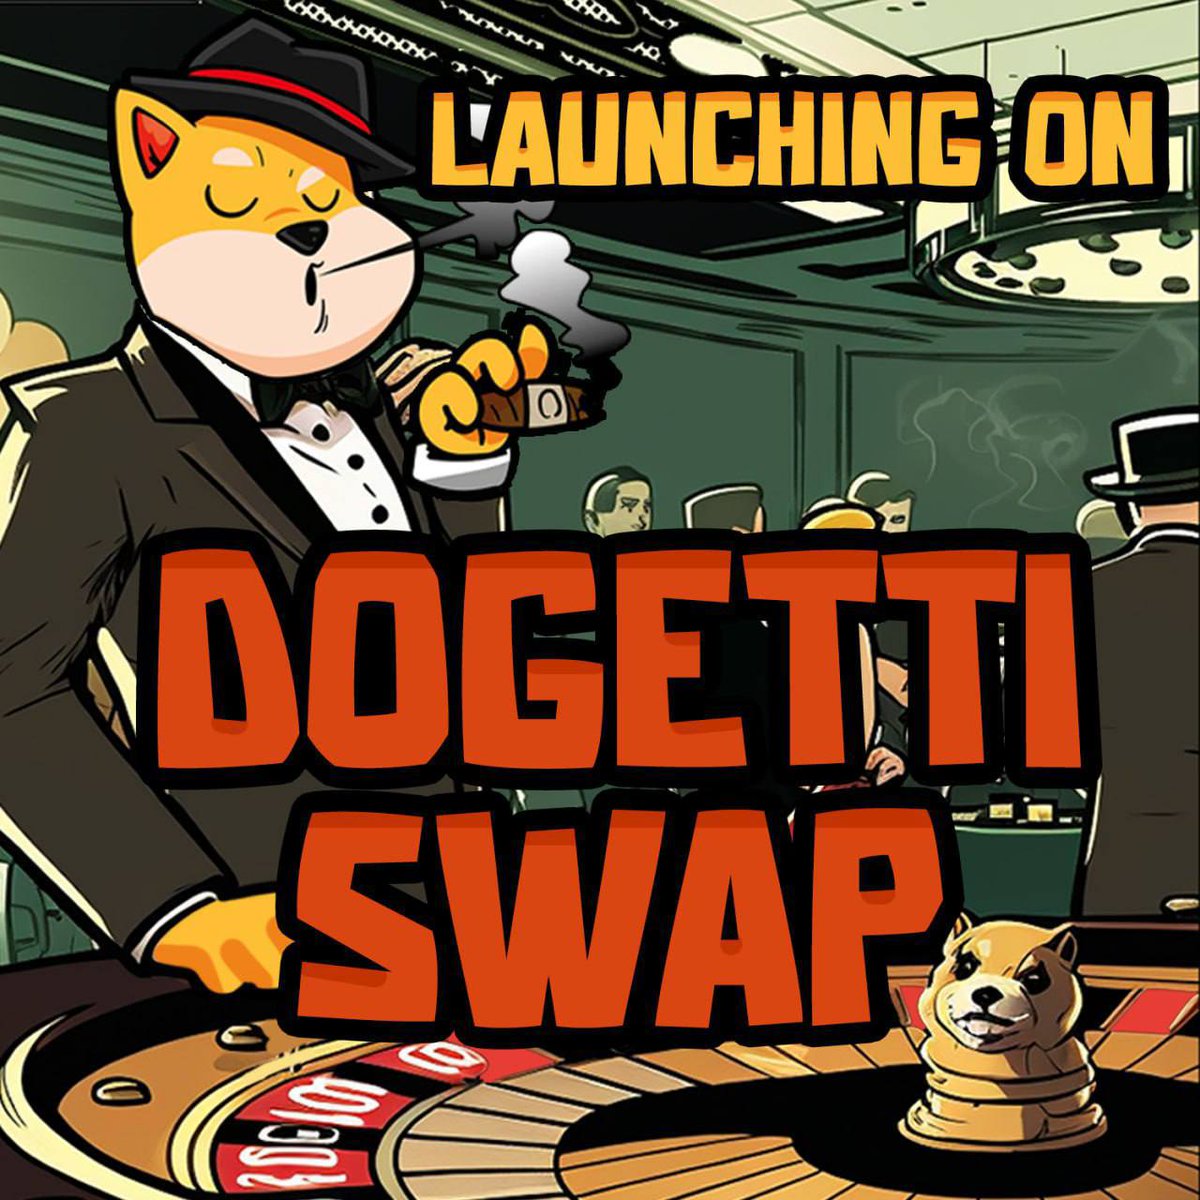 📢Dogetti Announcement 📢 🔗 Live on Dogetti SWAP: swap.dogetti.io (swap.dogetti.io) Enjoy the ruffest deal in town! 0% tax and trades 20% cheaper than anywhere else. Barkin' good! 🚀🚀 Get ready, Doggetti Family! 🚀🚀 #launch #dogettitothemoon #livenow